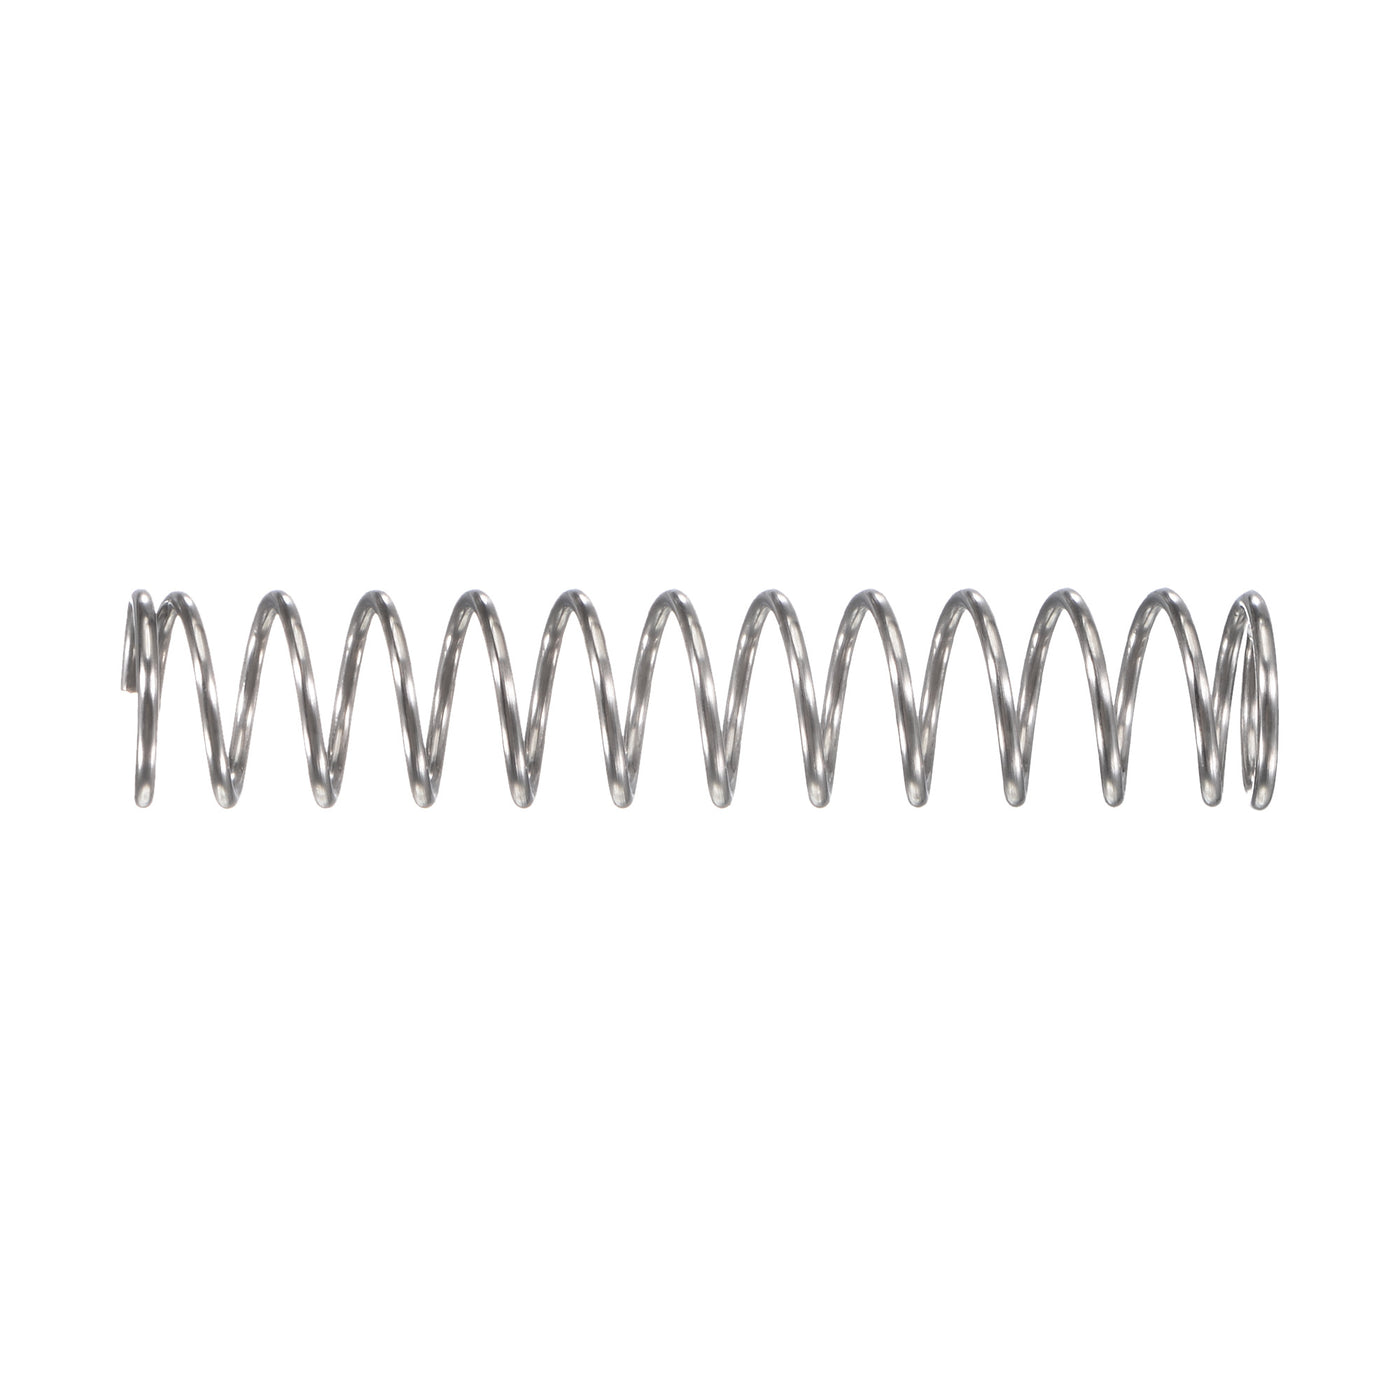 uxcell Uxcell 8mmx0.8mmx40mm 304 Stainless Steel Compression Spring 11.8N Load Capacity 10pcs